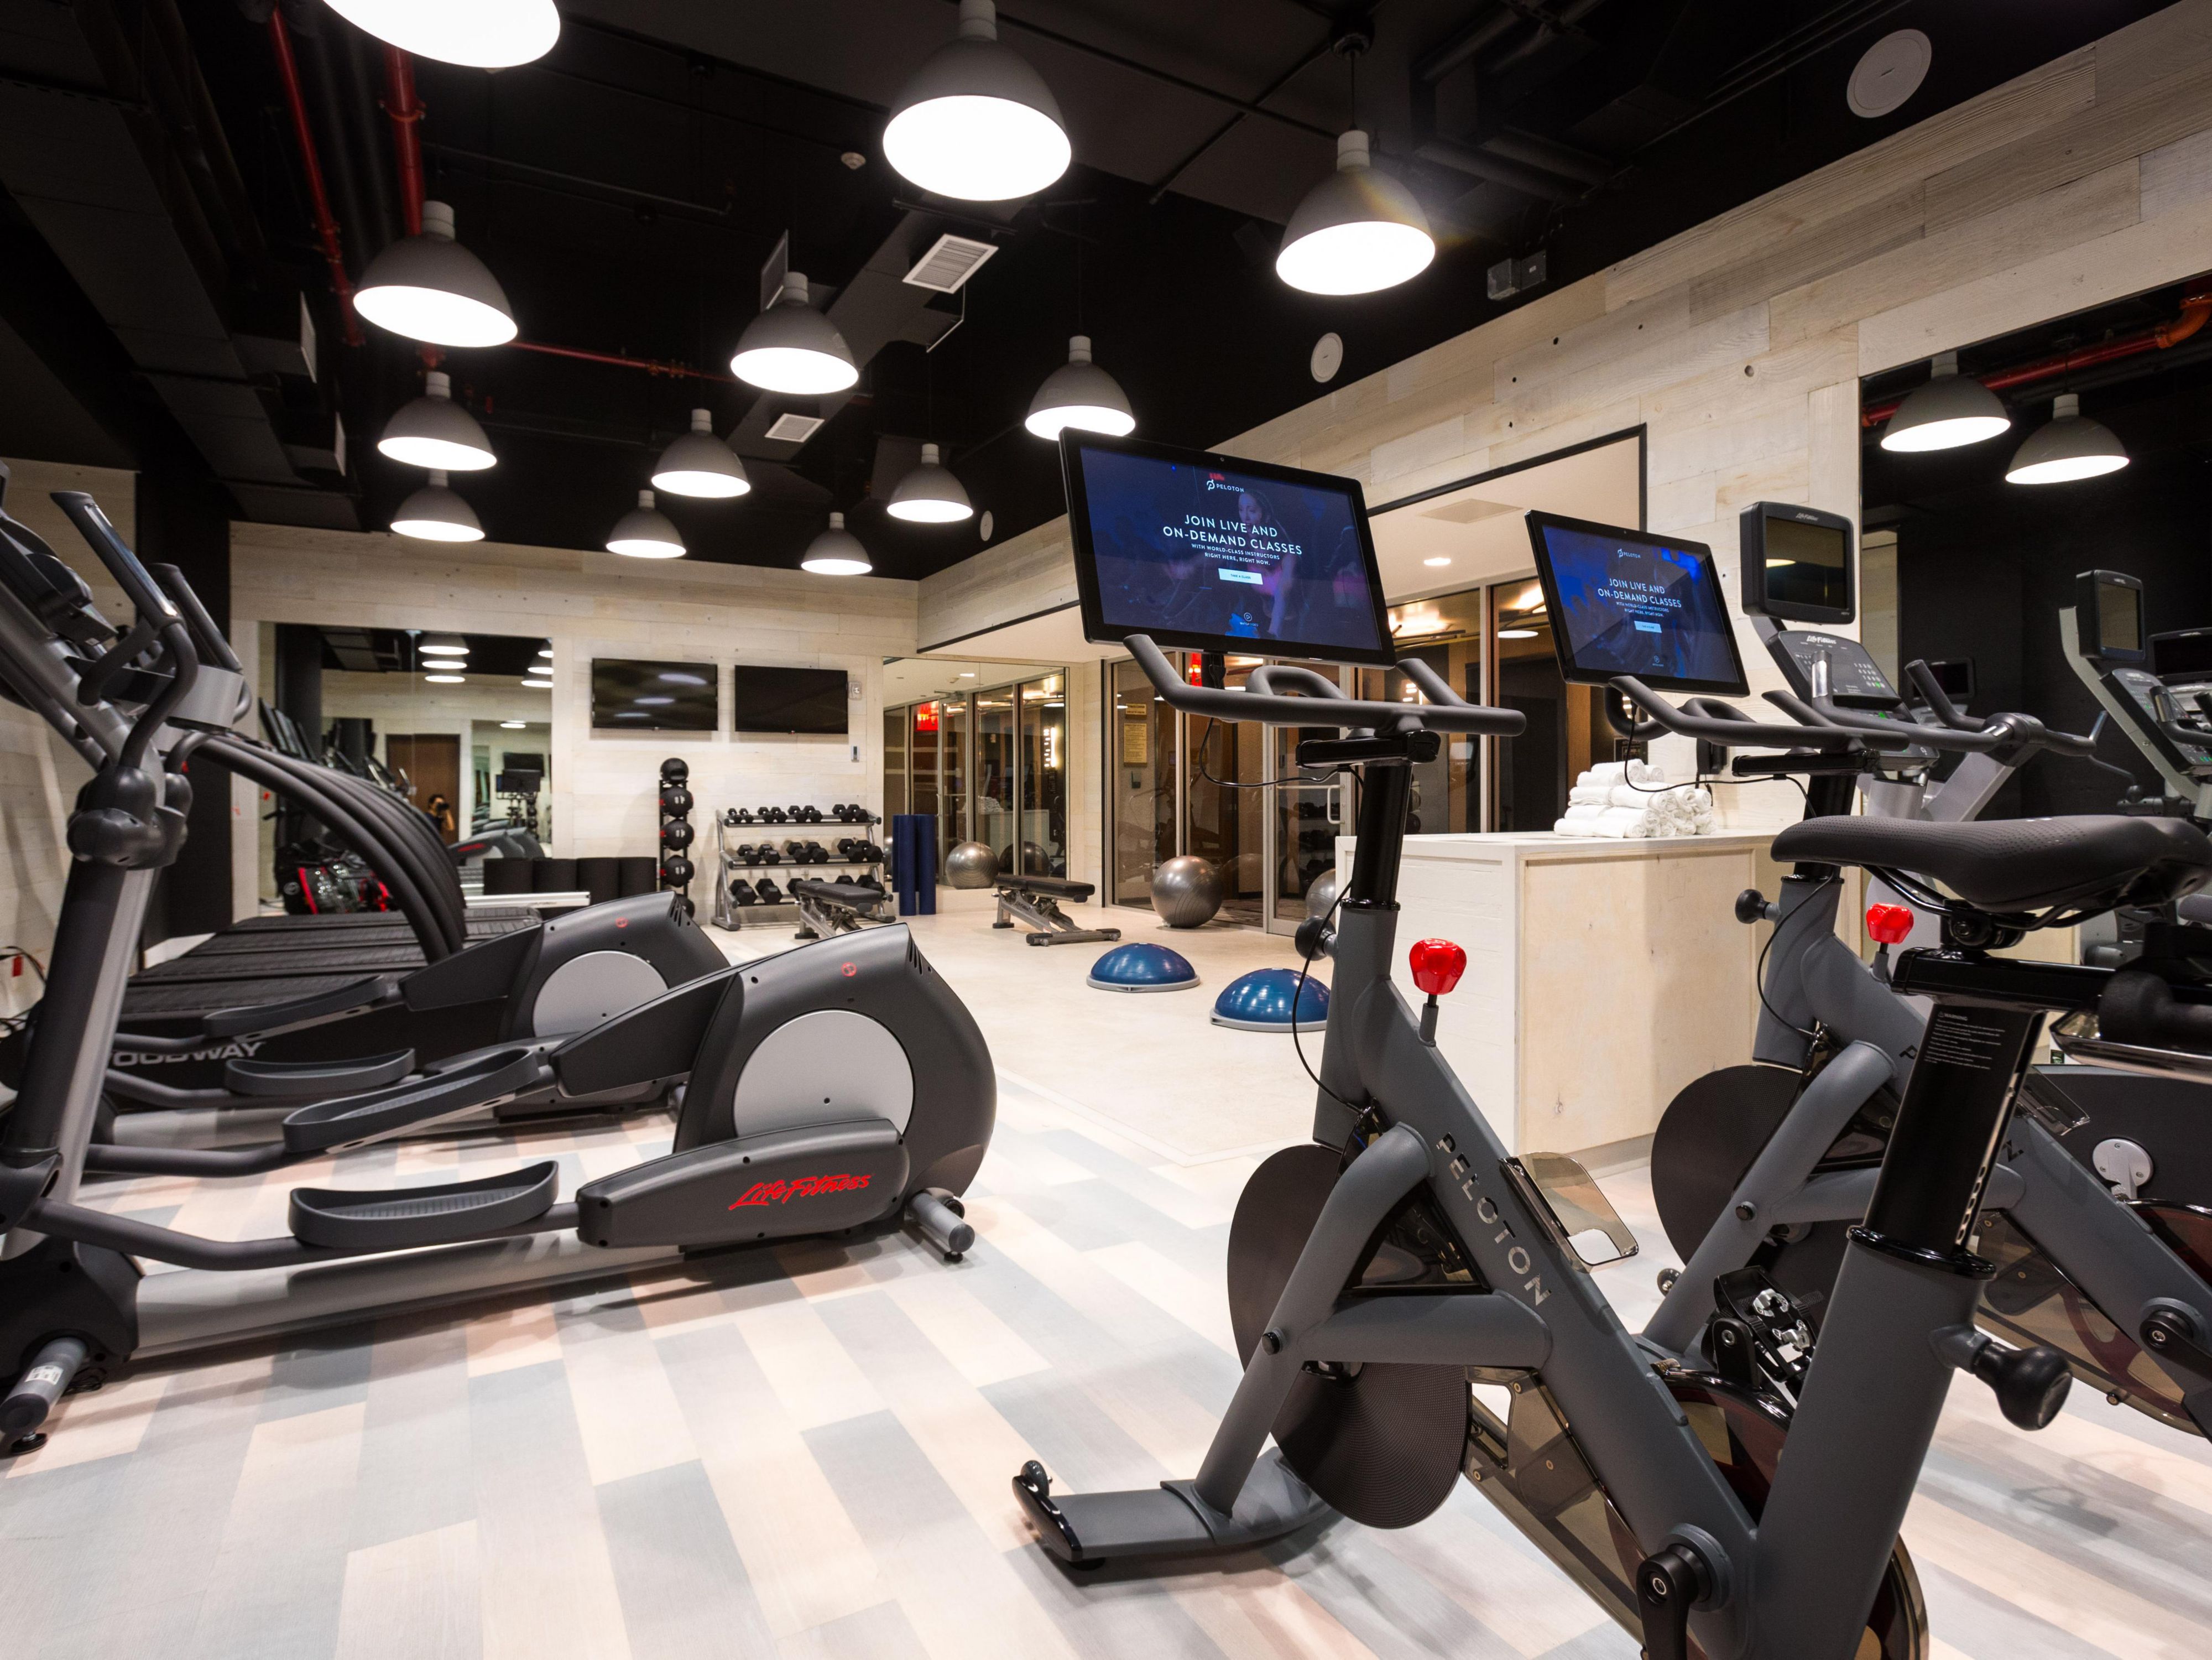 Don't let travel slow you down, our fitness center boasts Peloton Bikes with unlimited live and streaming instructor led classes, Woodway Precor Treadmills for the ultimate running experience, free weights, yoga equipment and much more.  